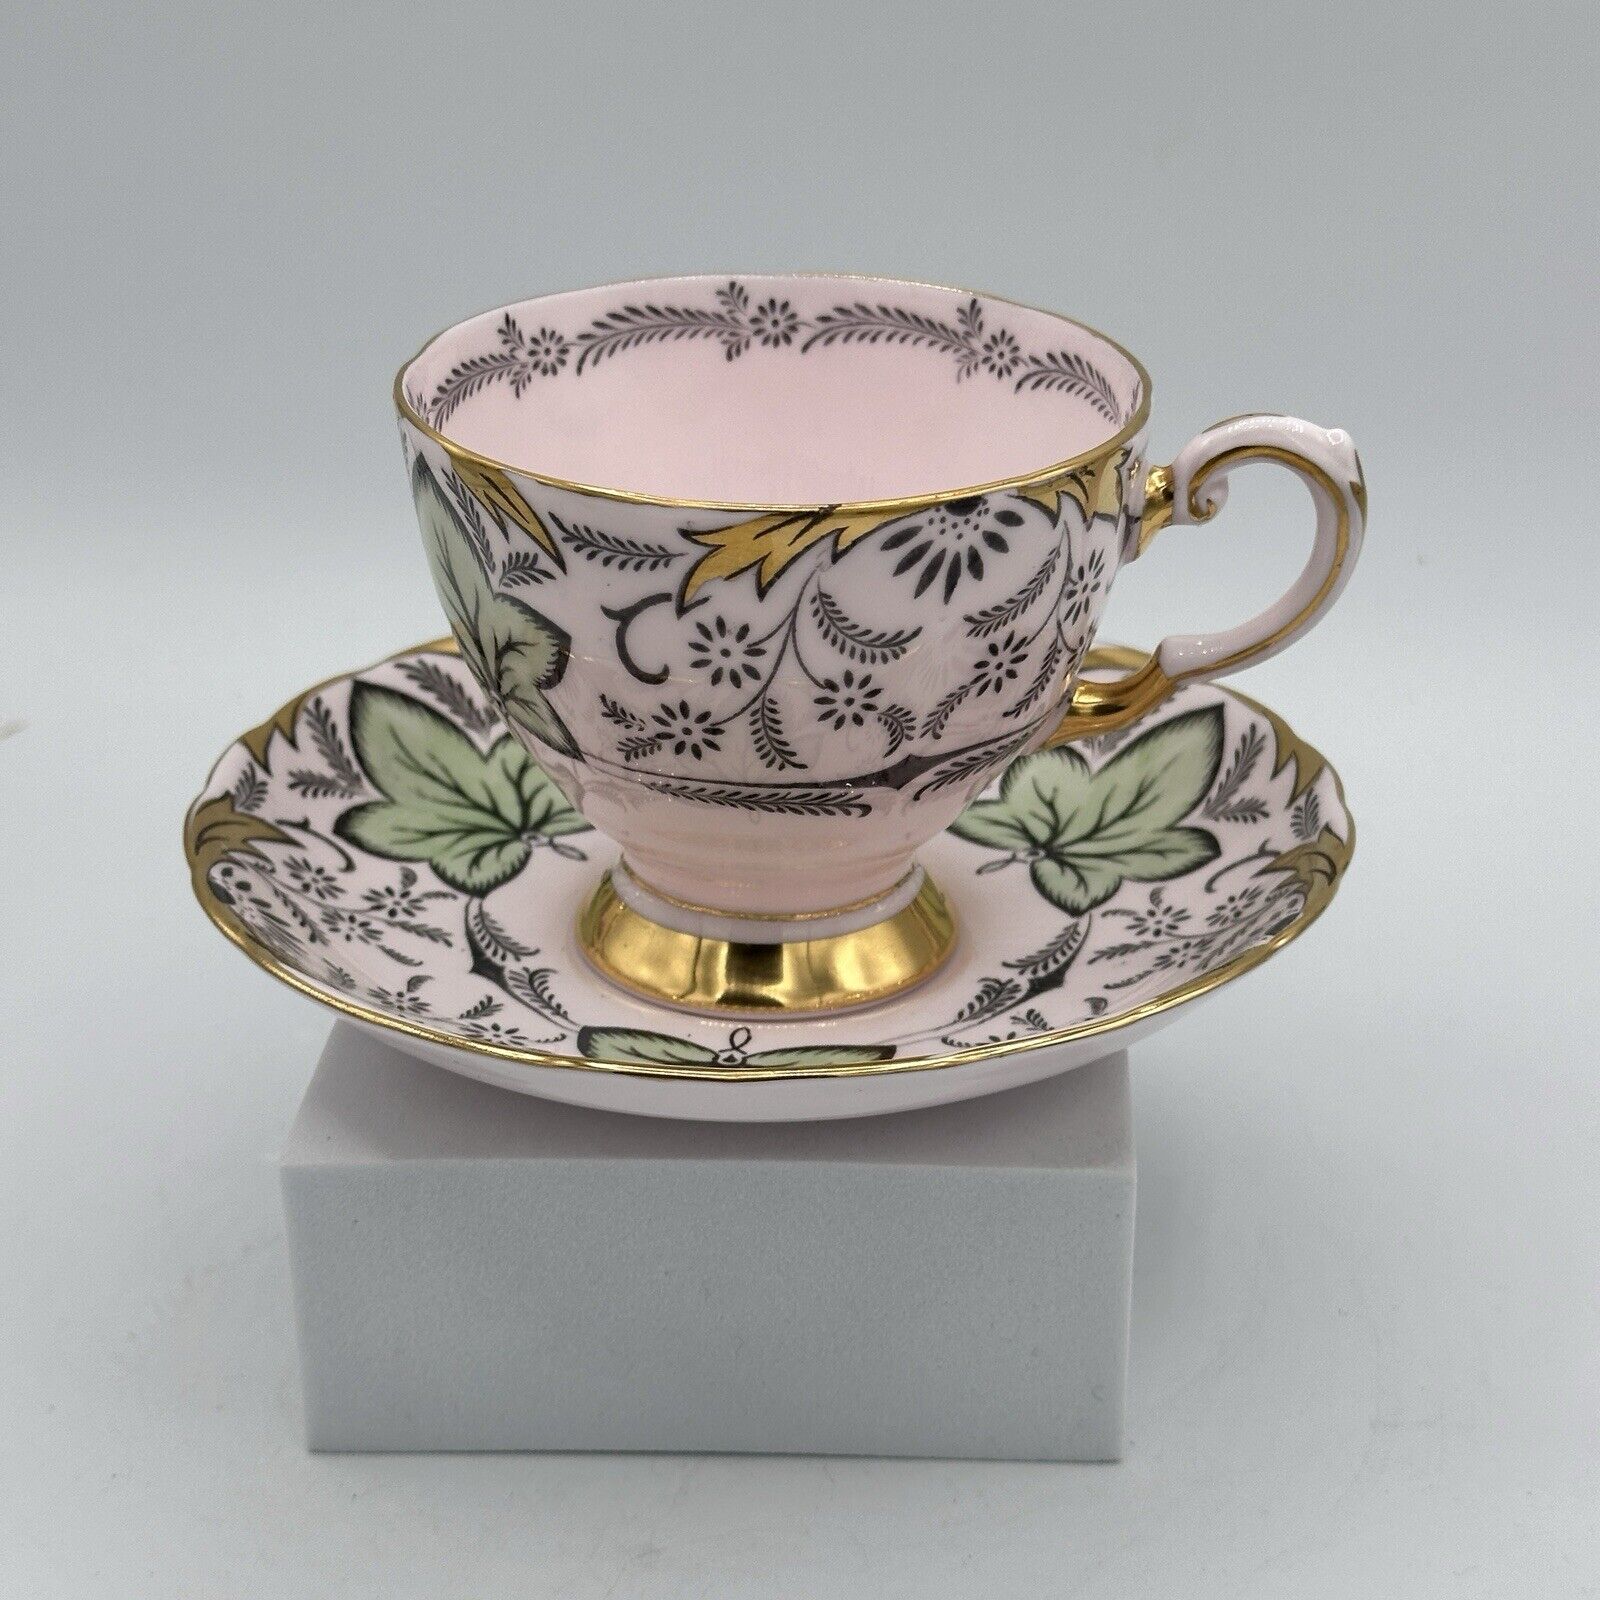 Tuscan Fine English Bone China Footed Cup Saucer 682H Pink Green Leaves Gilded